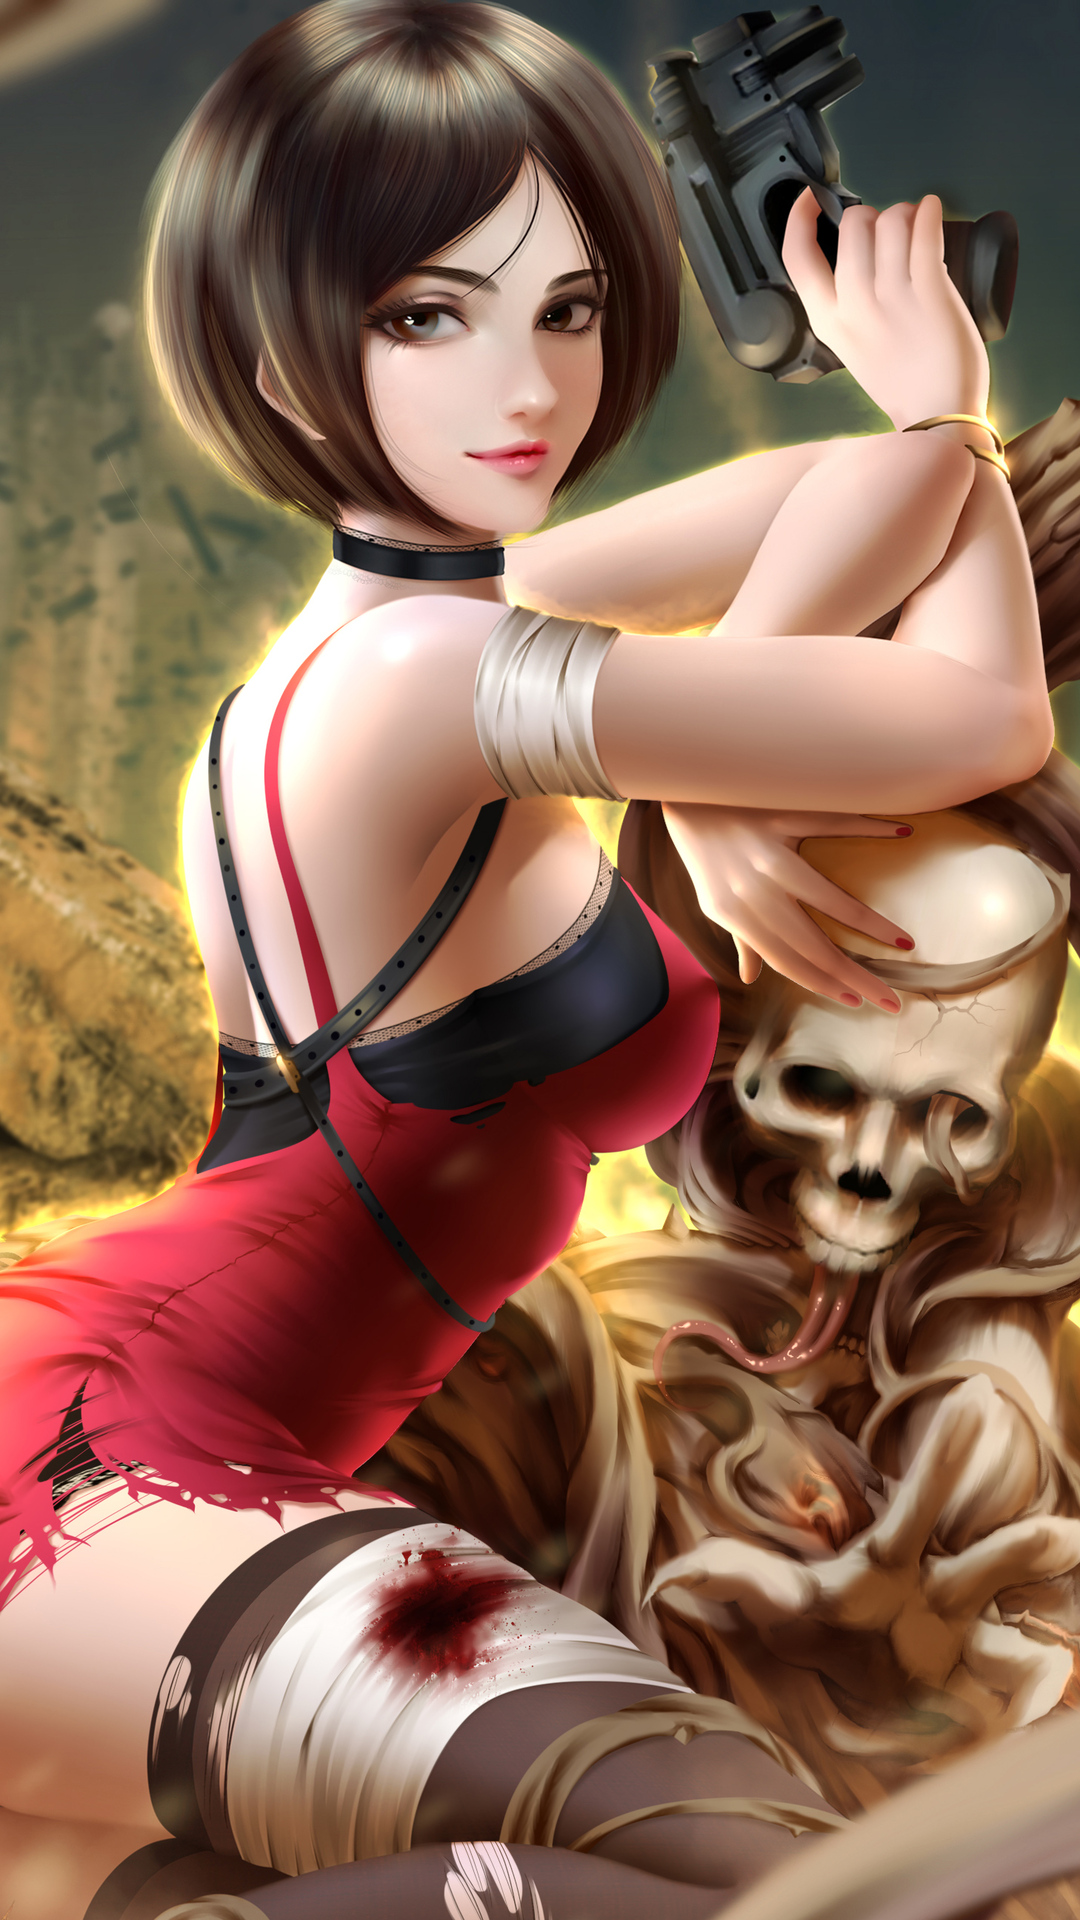 Adriana made for a perfect Ada Wong